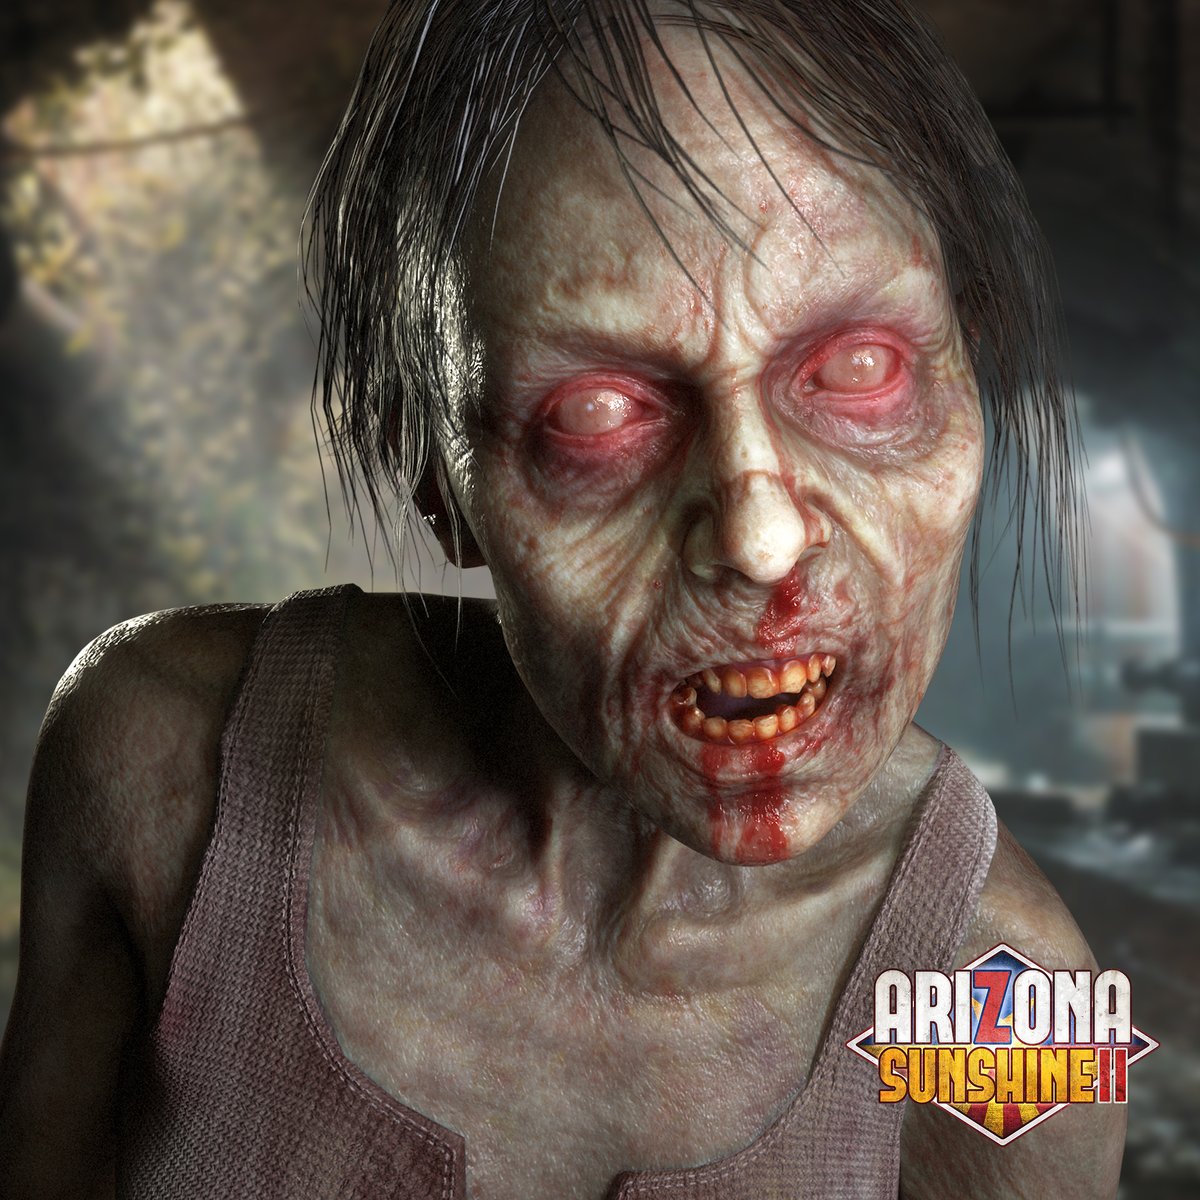 Haaaave you met Fred? 🧟‍♂️ Gear up, survivor! The apocalypse is here, and the Freddies are ready for a warm desert welcome. 🌵 It's time to show 'em what your made of! 💥 

Get #ArizonaSunshine2 here: arizona-sunshine.com